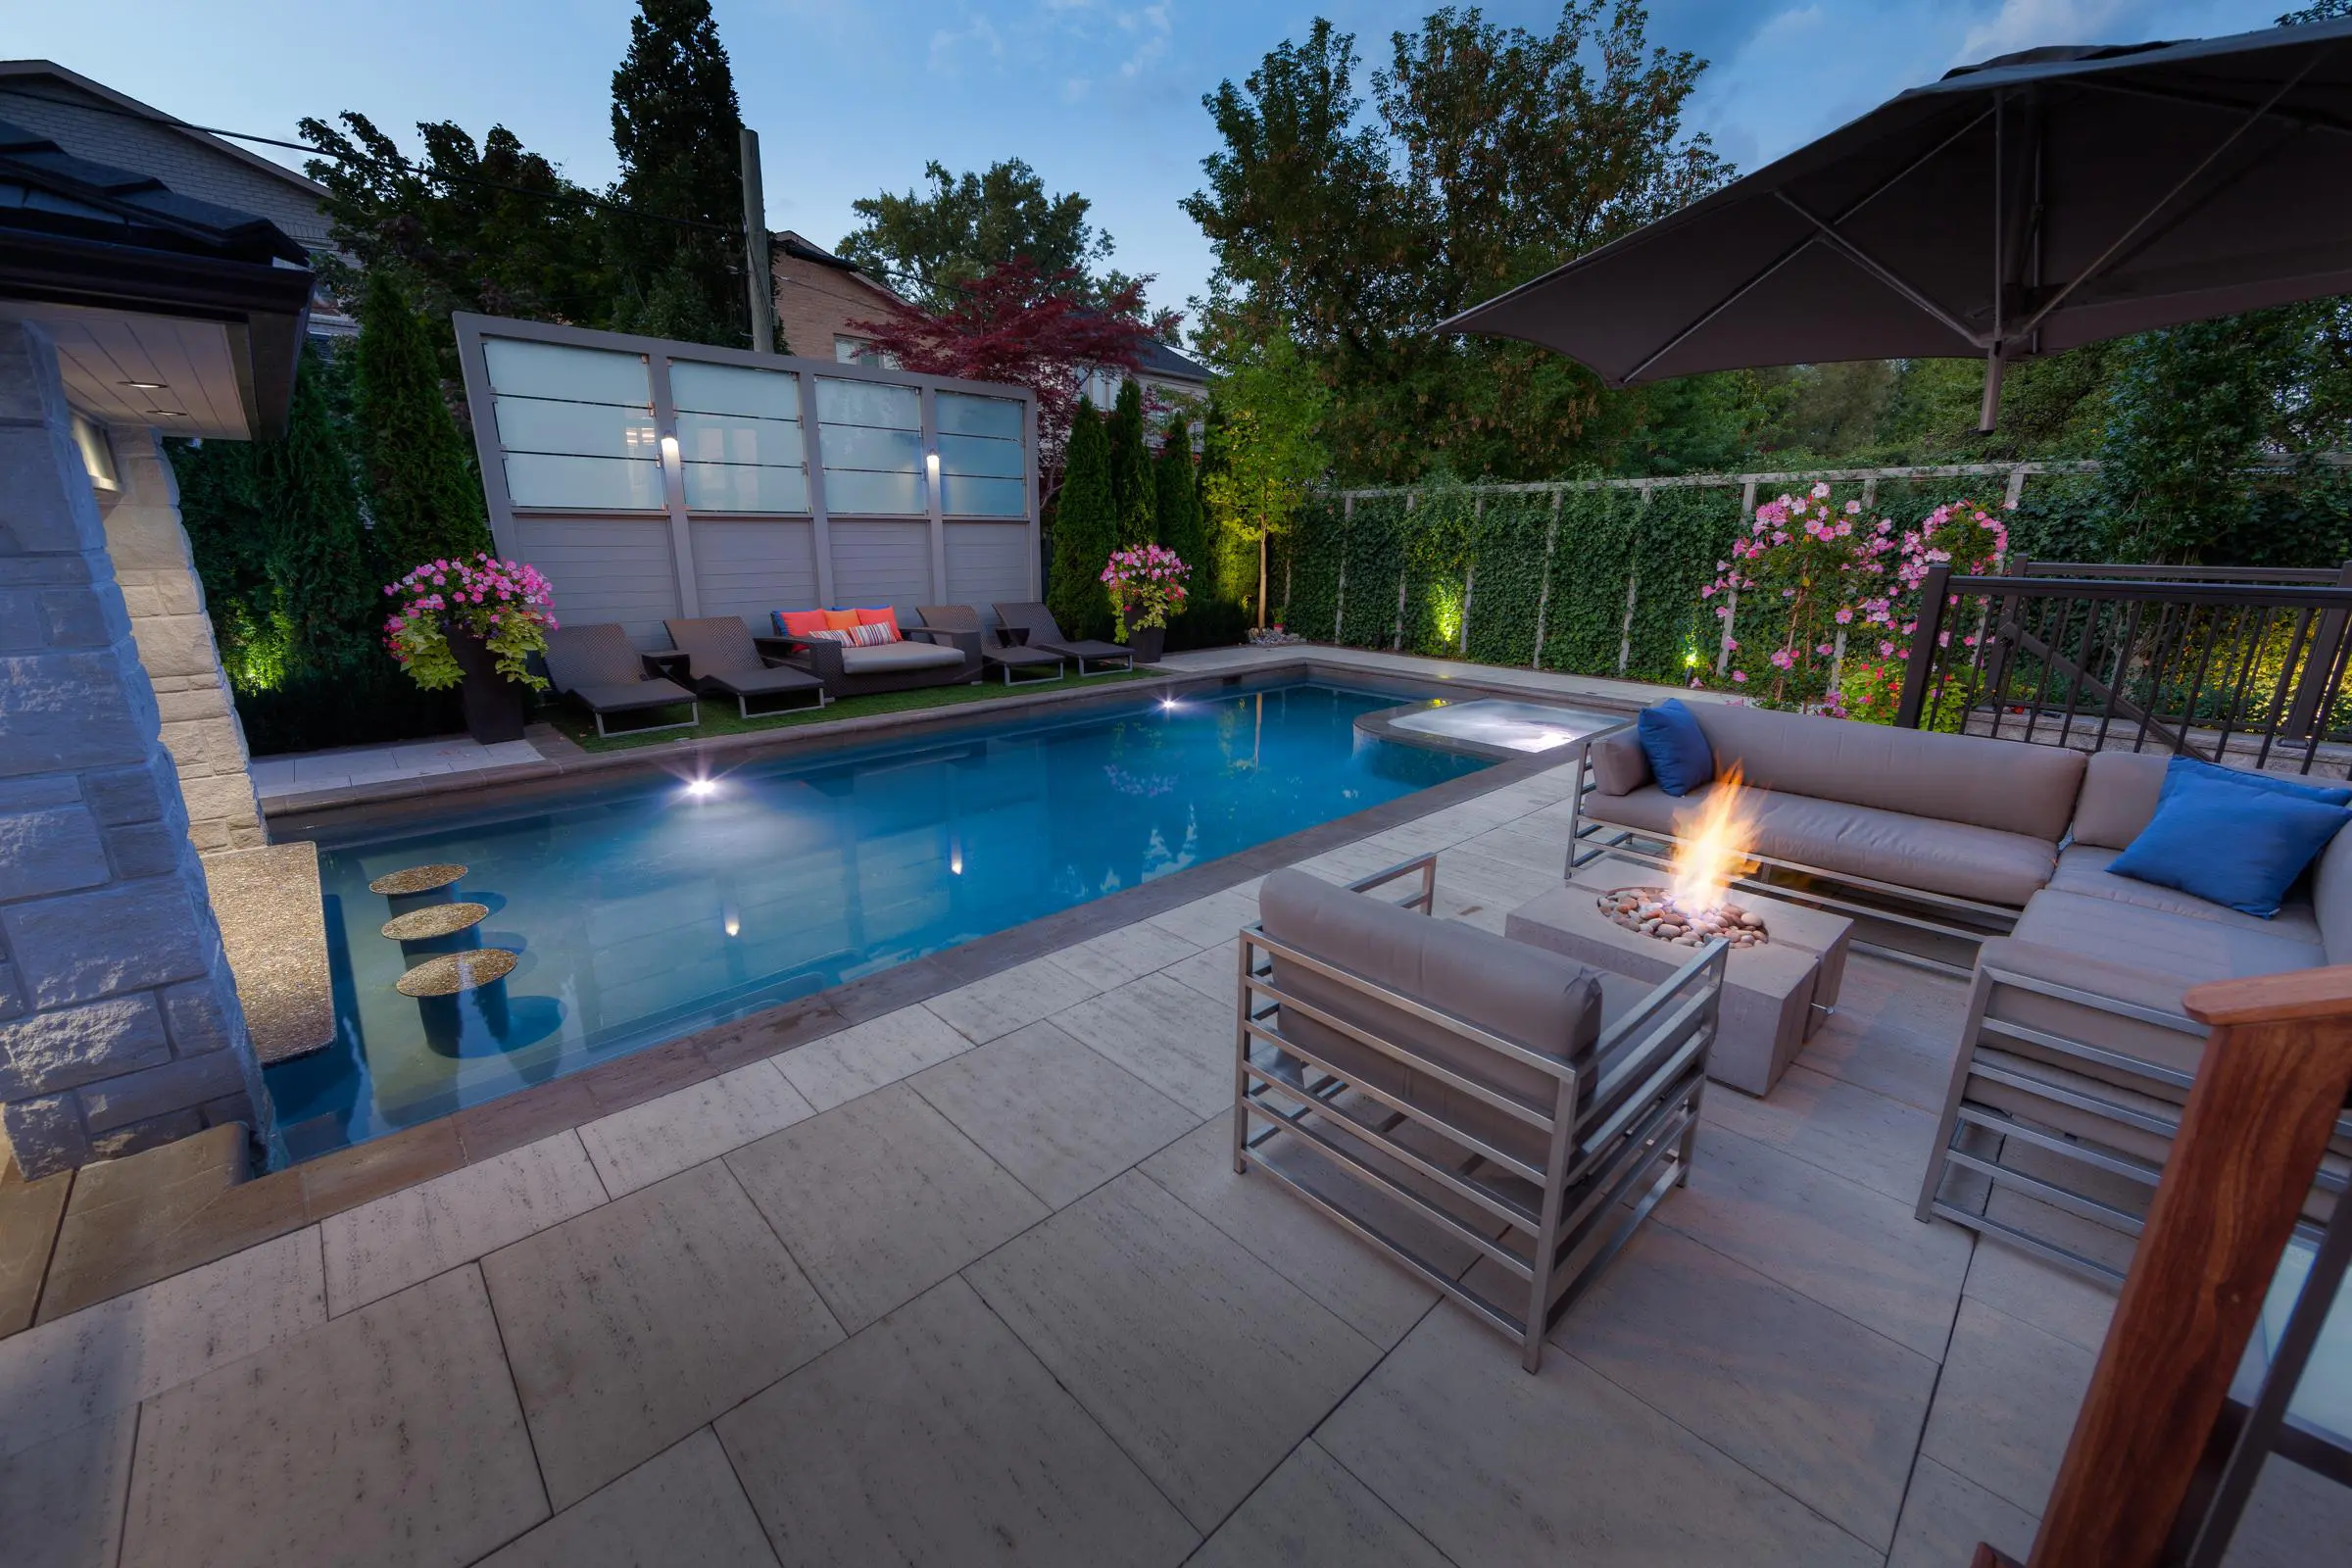 A lit square, modern concrete fire pit from Dekko’s Bravo collection forms the centerpiece of this modern patio corner, located to the right of the pool.